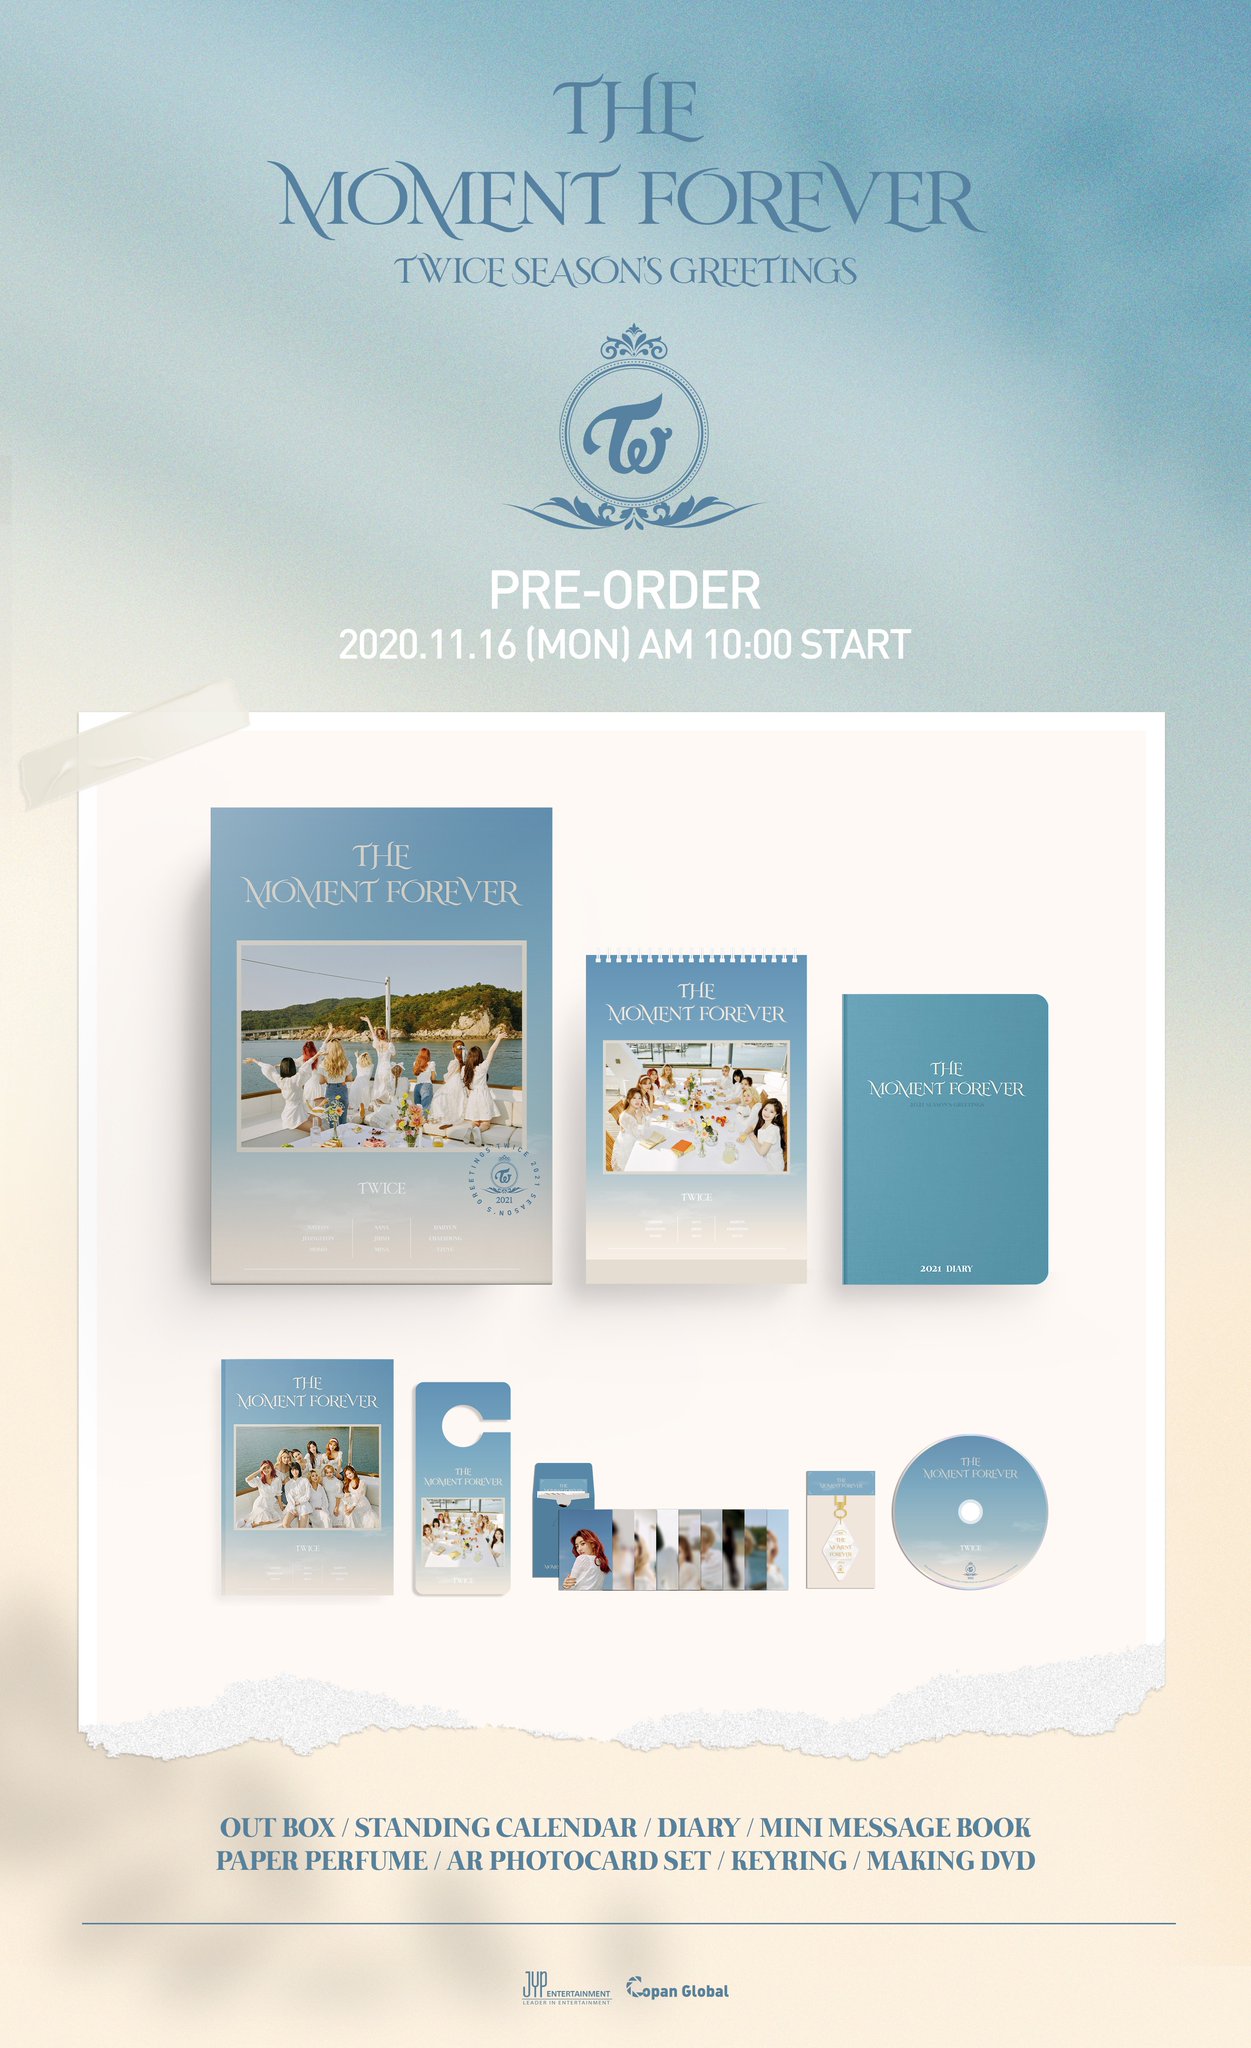 Twice 21 Season S Greetings The Moment Forever Celebrity Photos Videos Onehallyu